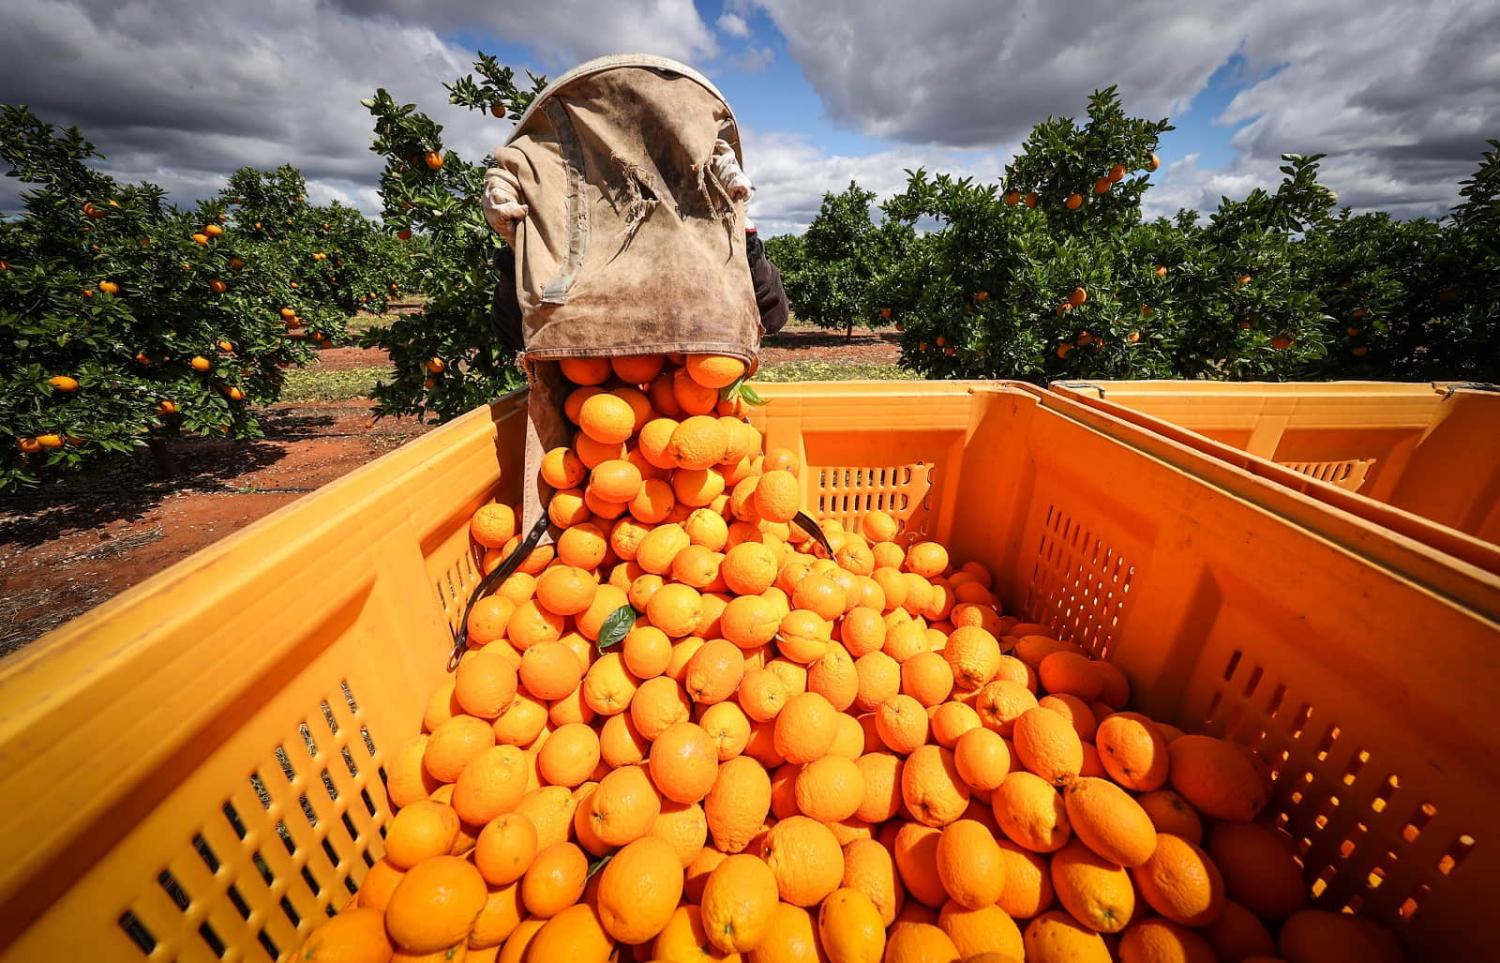 A seasonal worker empties Valencia oranges into a cart during a harvest near Griffith, New South Wales (David Gray/Bloomberg via Getty Images)